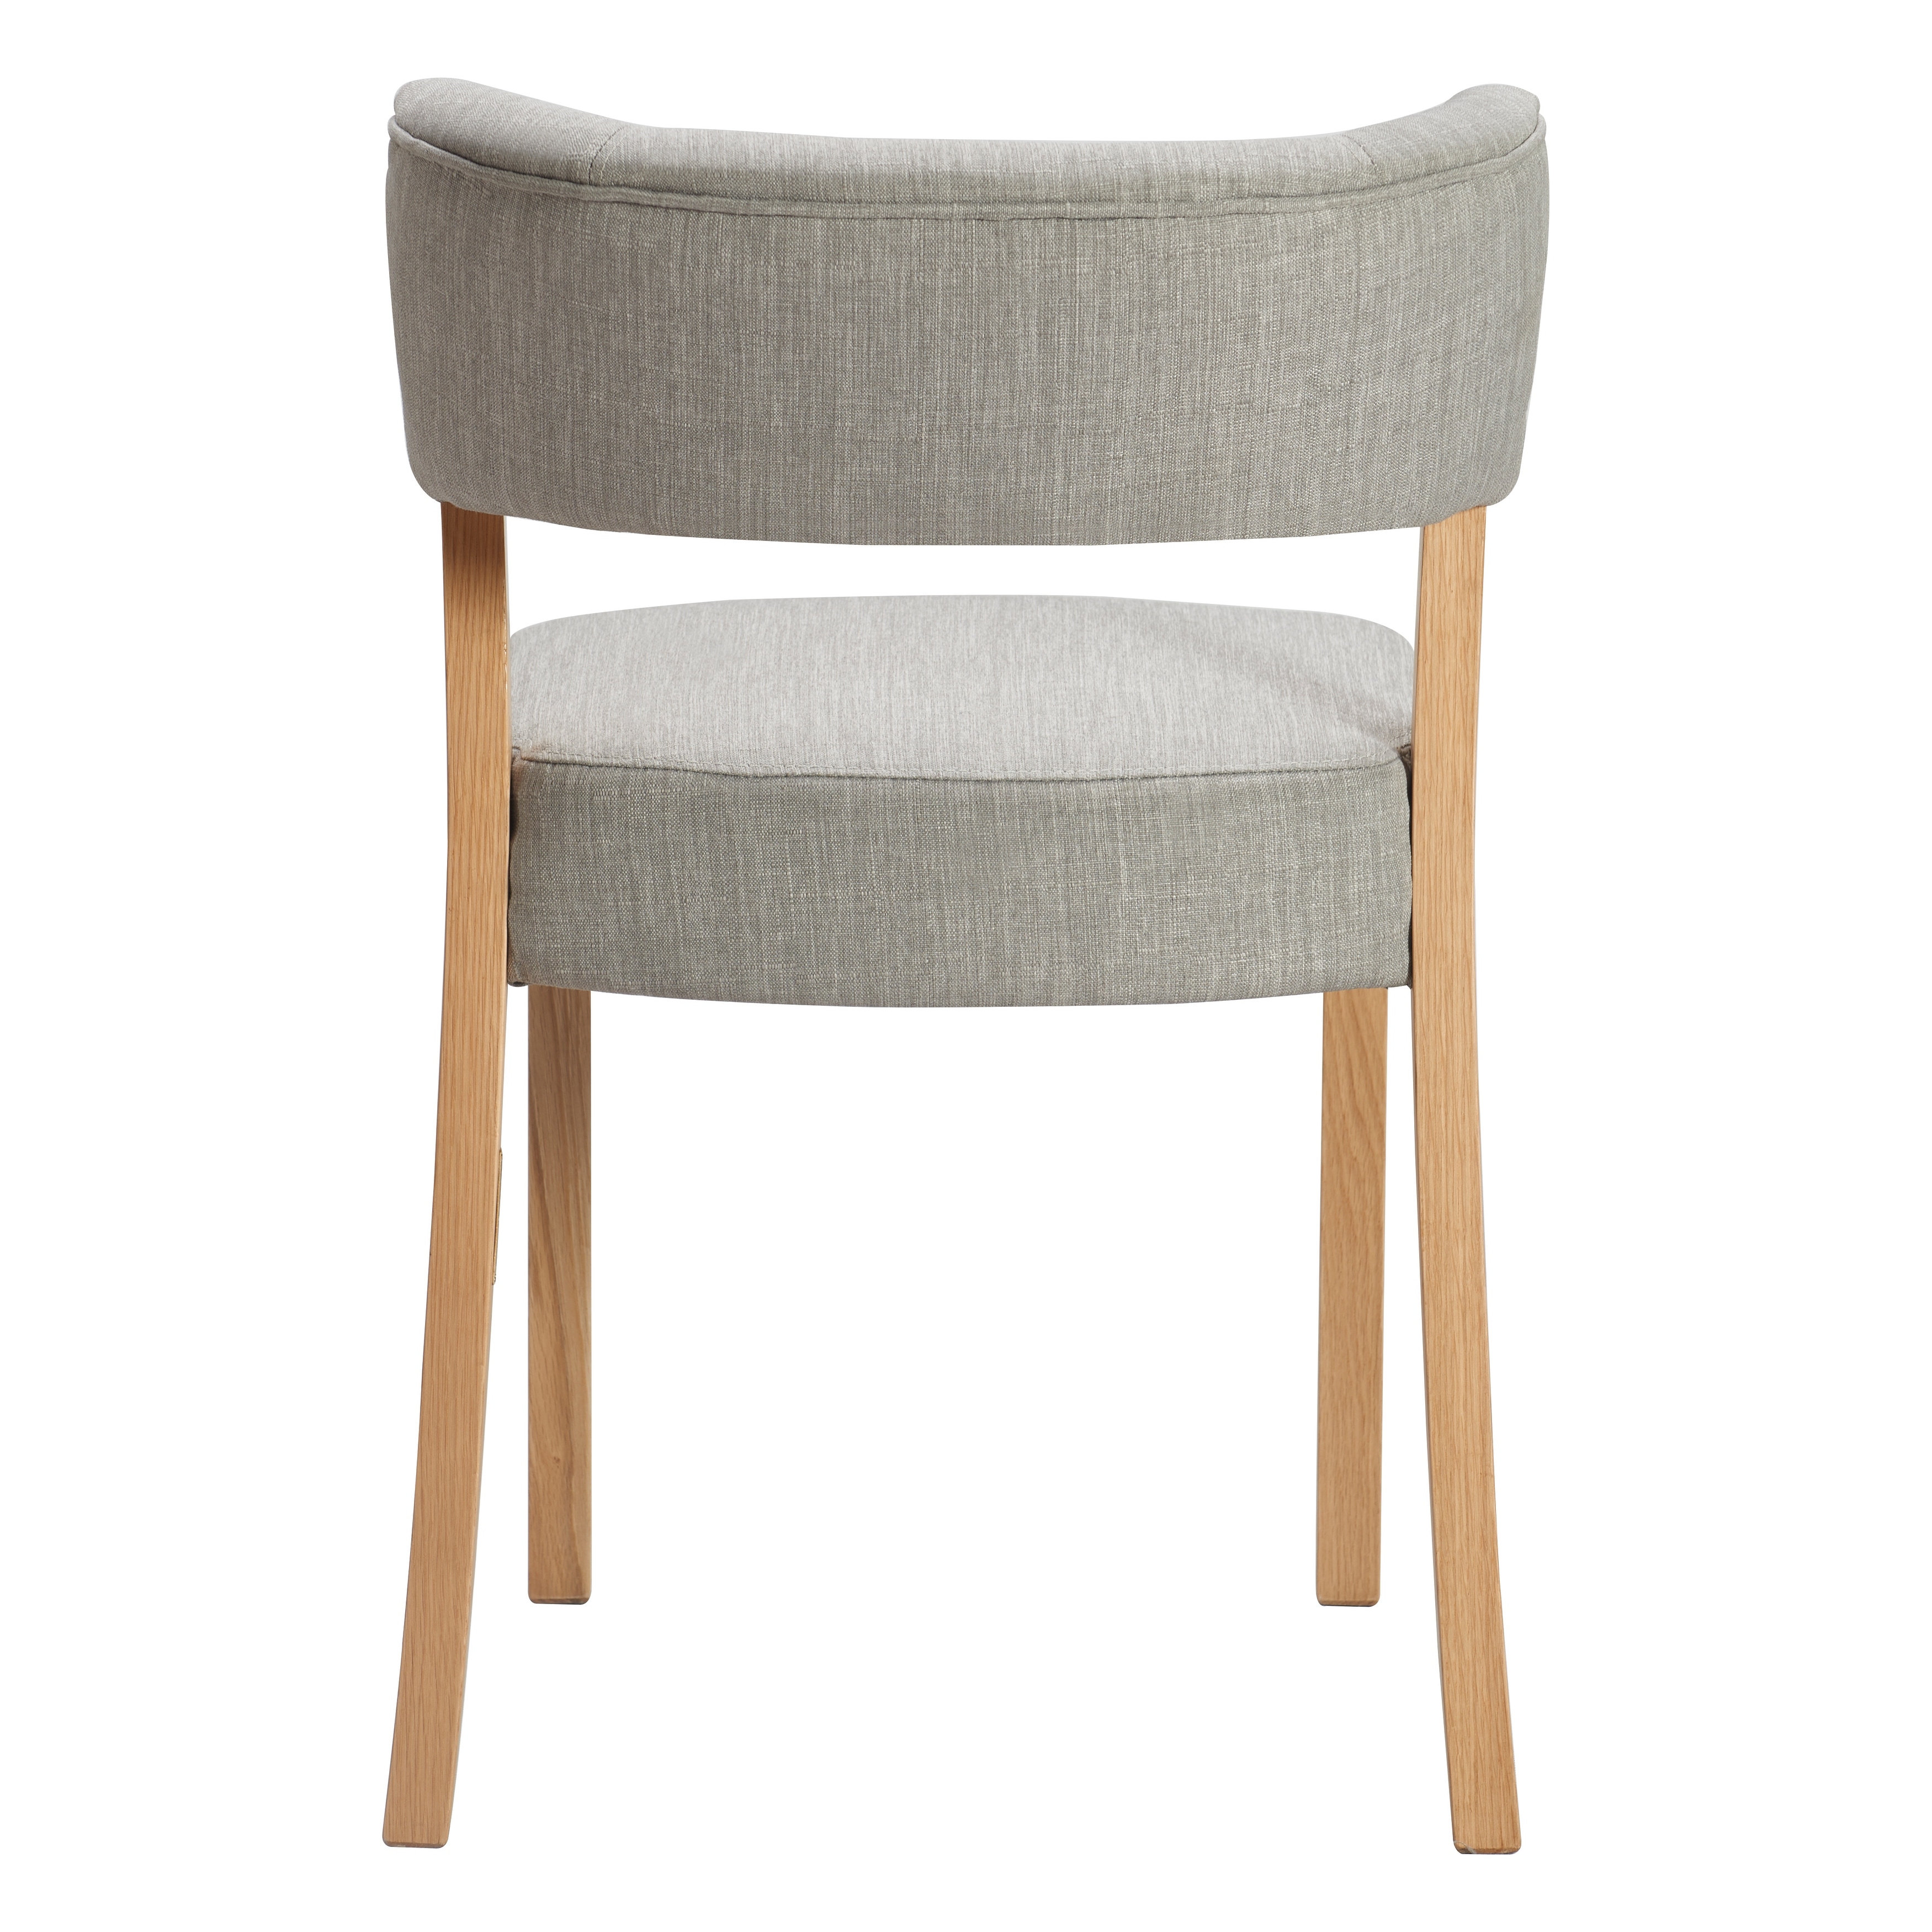 Tommy Hilfiger Waltham Dining Chair, Set of 2, Light Gray